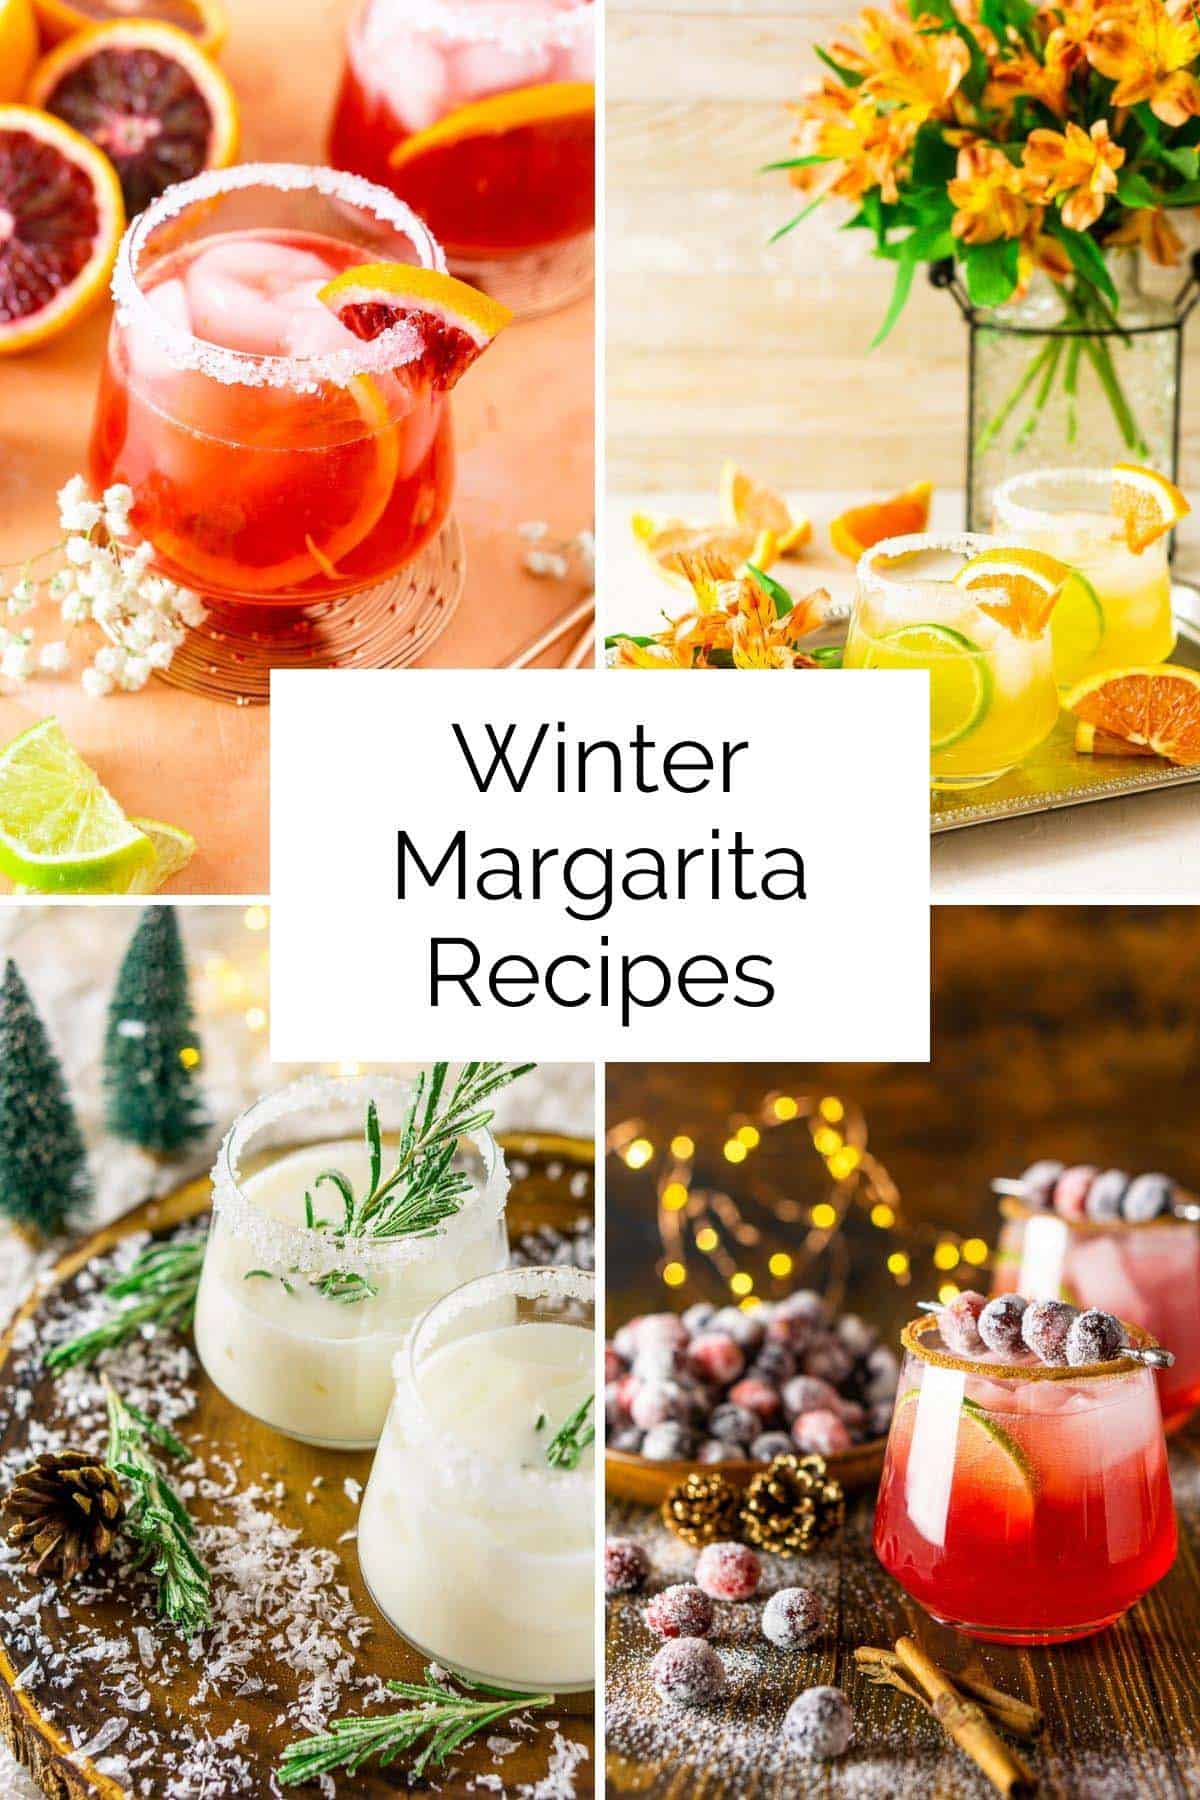 A collage showing four featured winter margarita recipes with text overlay.